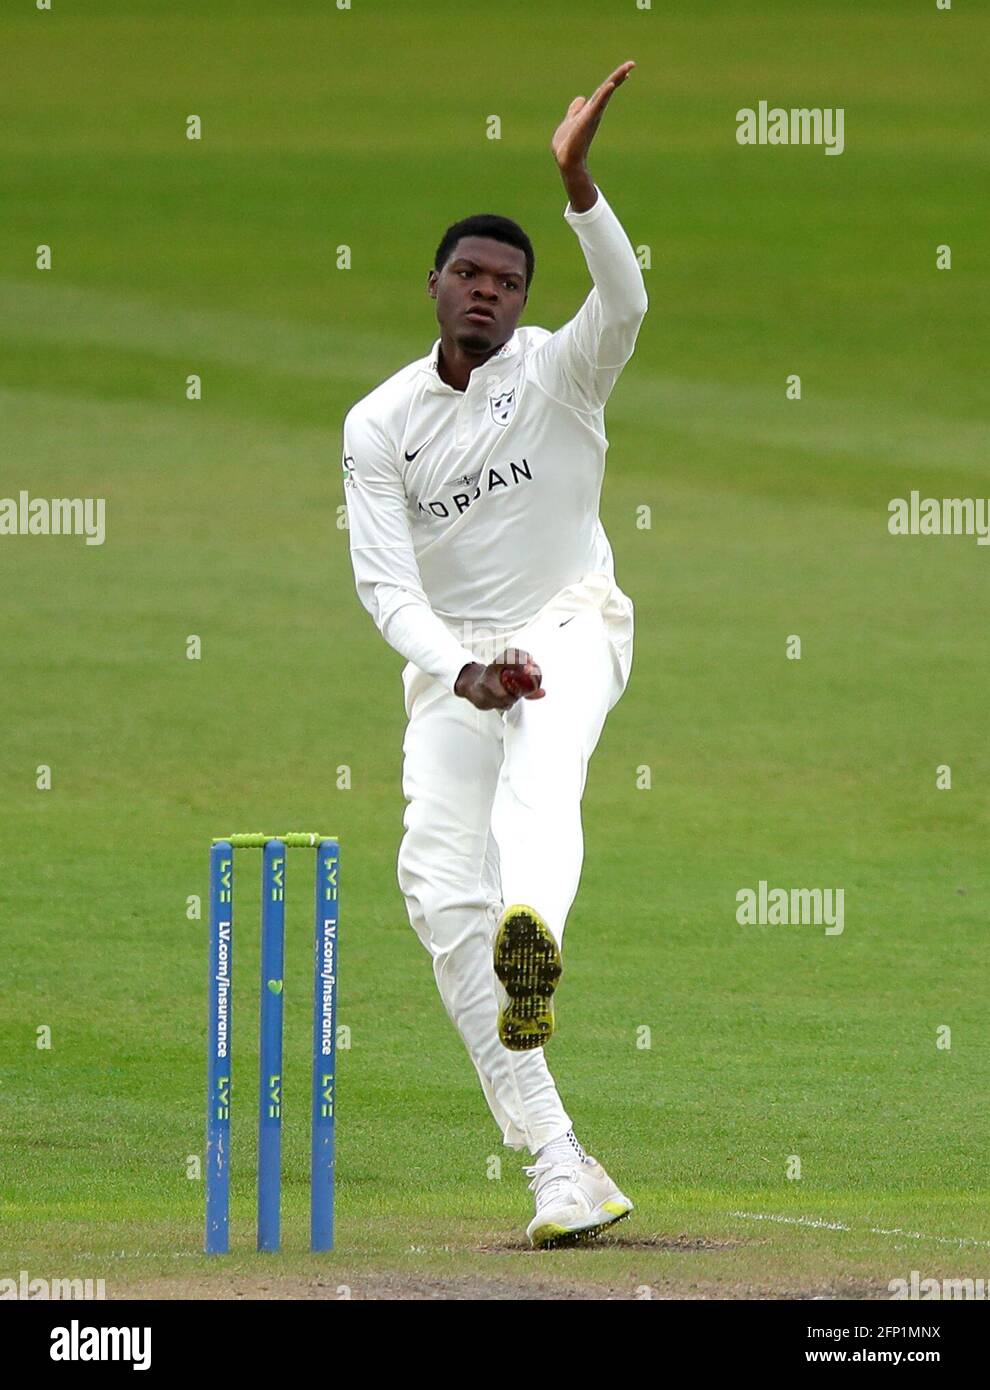 Worcestershire's Alzarri Joseph bowls during day one of the LV= Insurance County Championship match at Trent Bridge, Nottingham. Picture date: Thursday May 20, 2021. Stock Photo